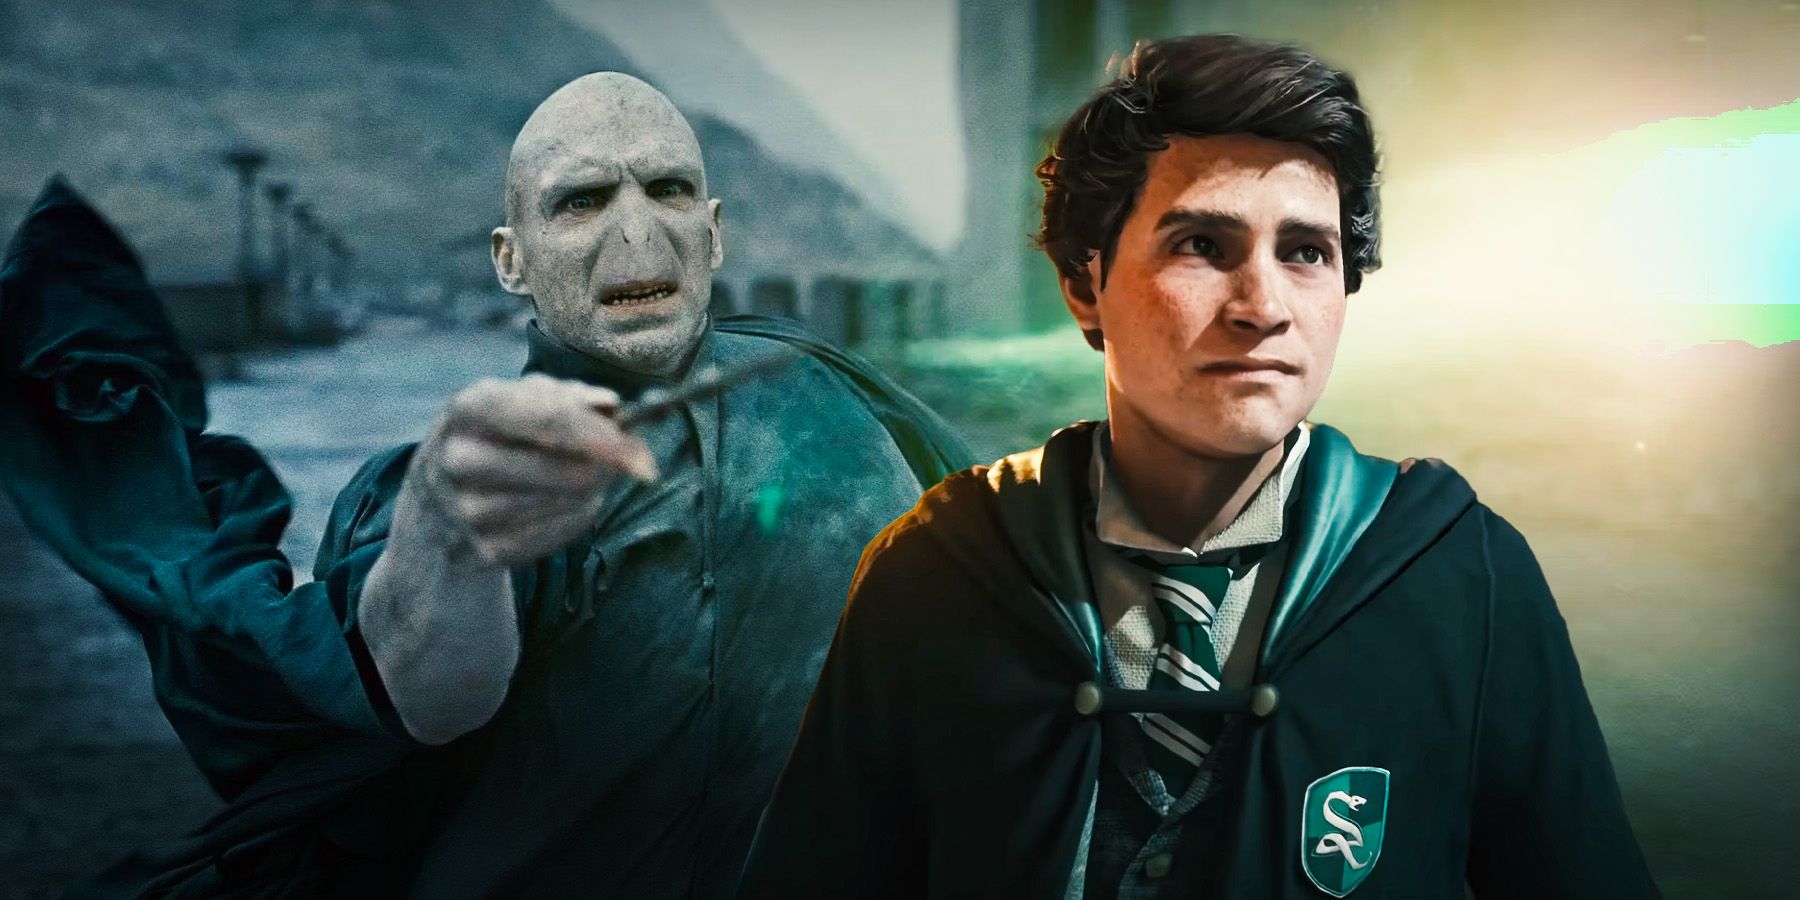 Voldemort from Harry Potter and Sebastian Sallow from Hogwarts Legacy